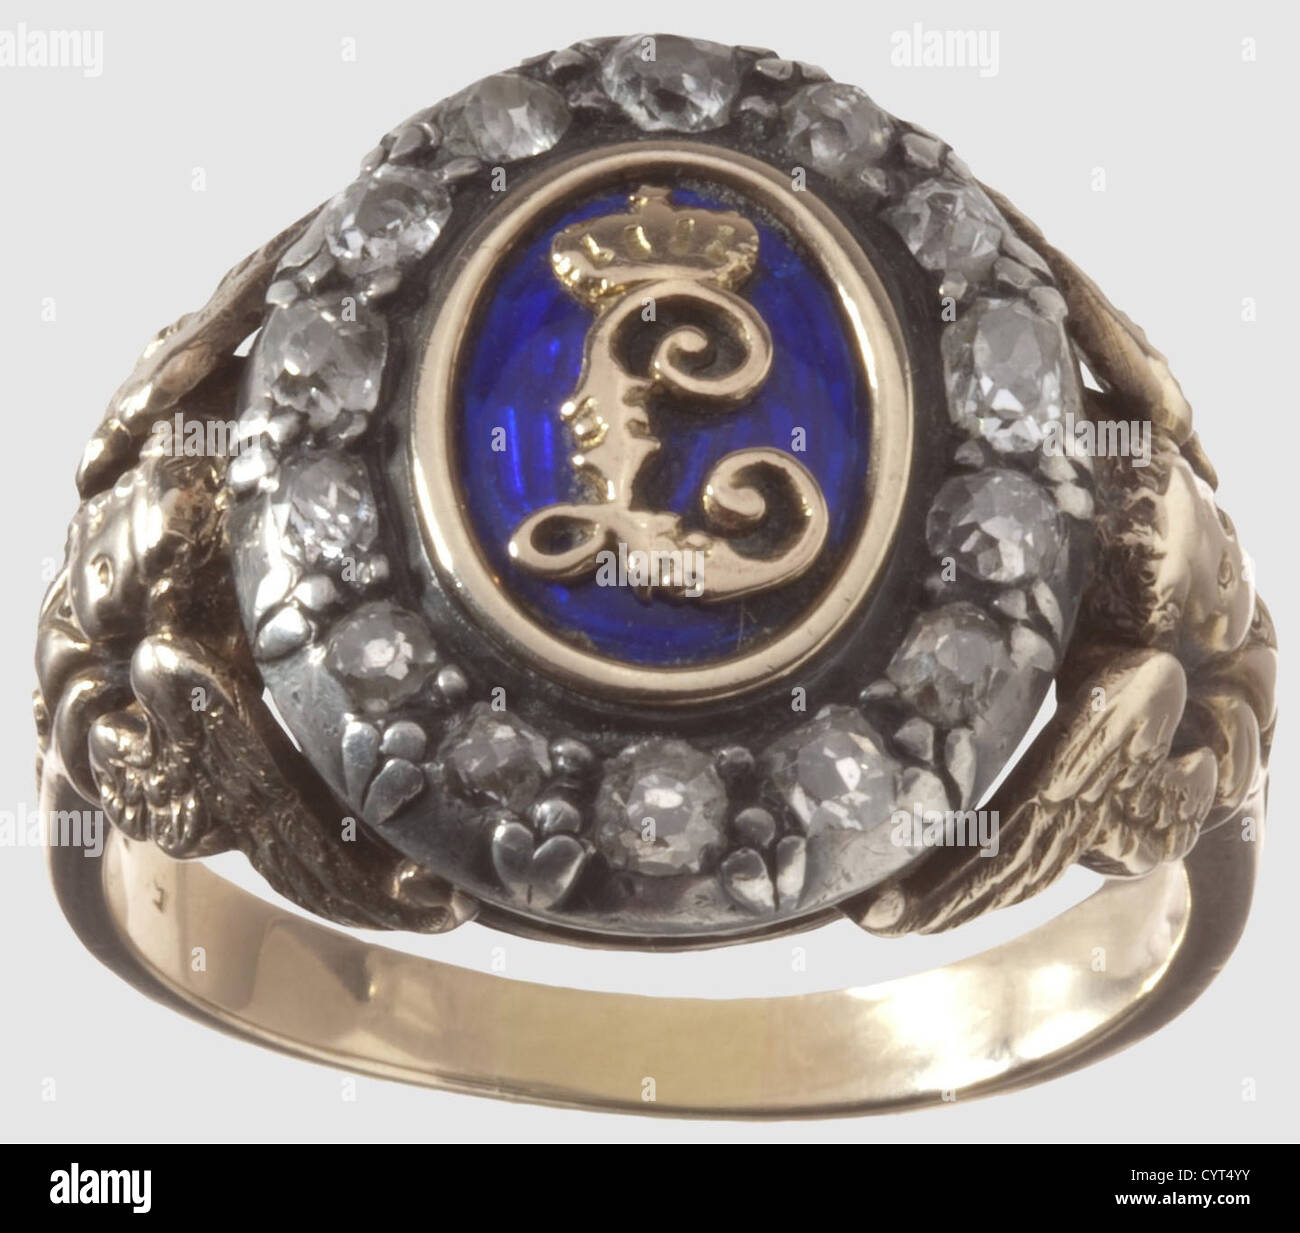 King Ludwig II of Bavaria(1845-1886),a diamond set gift ring for a distinguished Munich citizen Red gold,blue enamelled centre with applied gold cypher 'L',the hoop of white gold,set with 14 old European cut diamonds,the shoulders embellished with cupids and decorations. The inside of the ring stamped '585'. Large ring size for men. Weight 10.8 g. The ring comes from private ownership(further details provided to the buyer if desired)and has never been on the market before,a used piece of jewellery of strong appeal,historic,historical,19th century,B,Additional-Rights-Clearences-Not Available Stock Photo